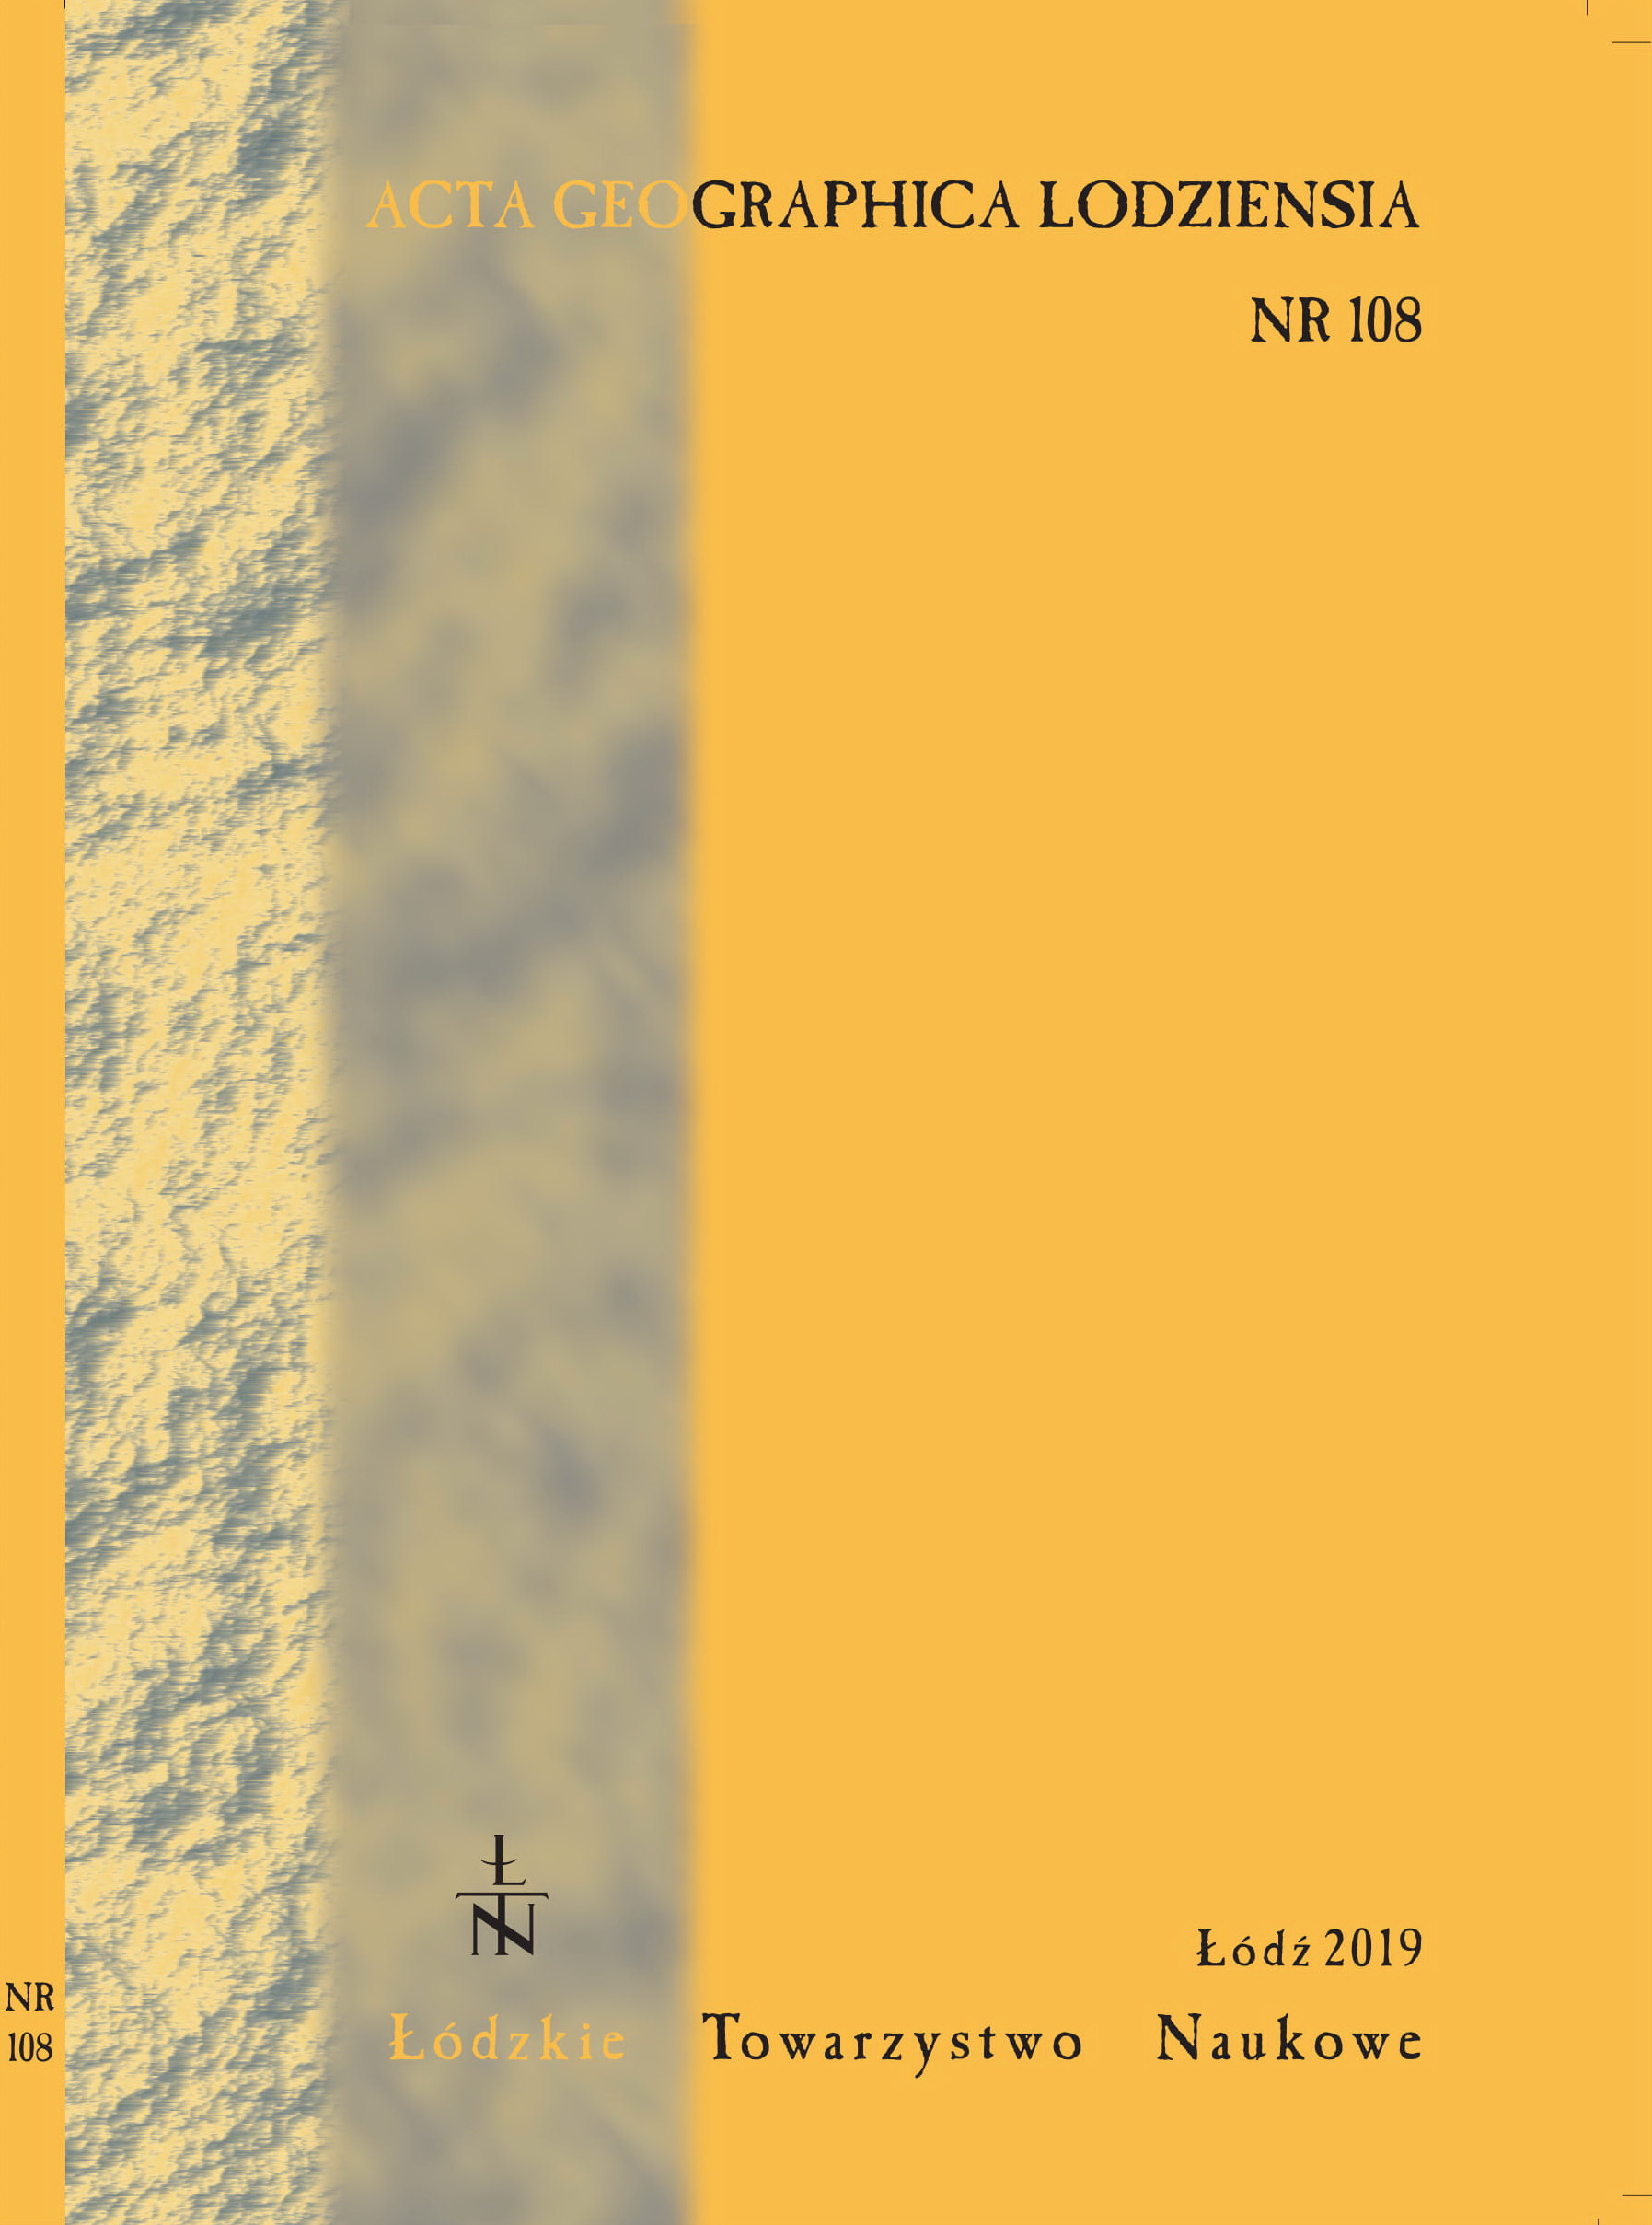 Historical and contemporary studies of Wrocław’s climate – measurements and models Cover Image